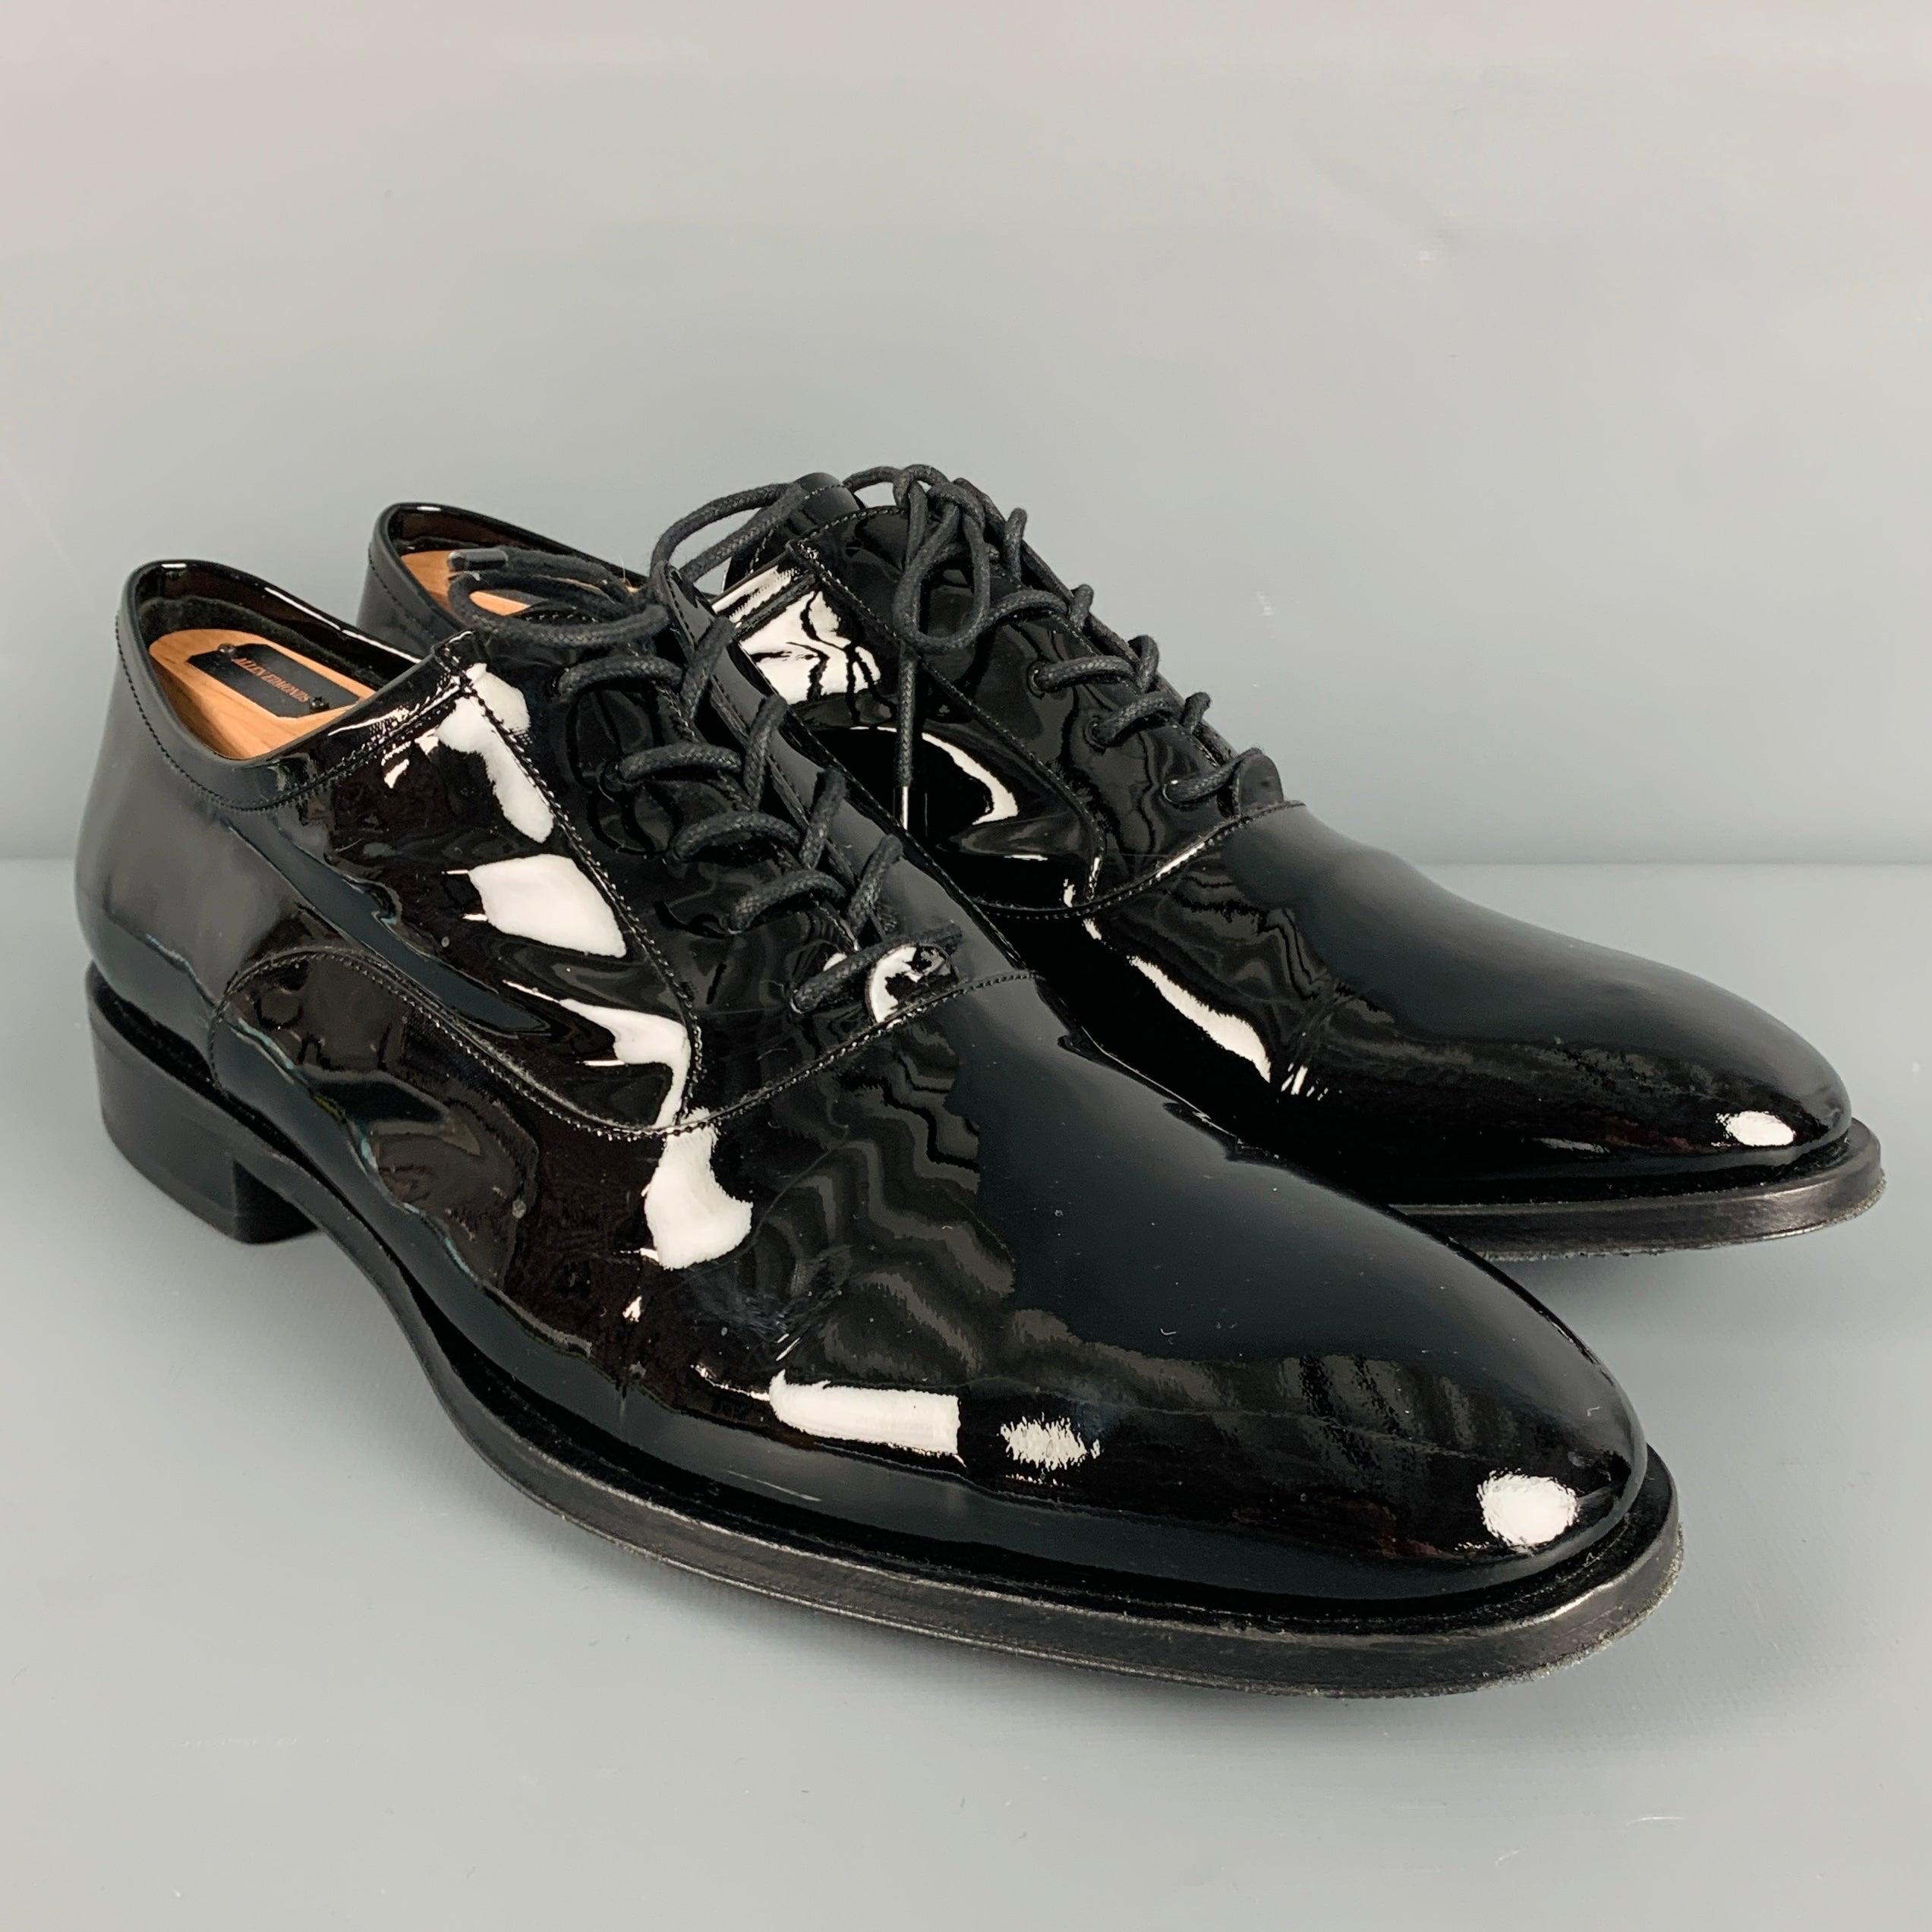 ALLEN EDMONDS x LA SCALA shoes in black patent leather featuring an almond toe style and lace-up closure. Comes with shoe trees. Made in Italy.Very Good Pre-Owned Condition. Minor signs of wear. 

Marked:   20150 32/17 11 DOutsole: 12.25 x 4.25